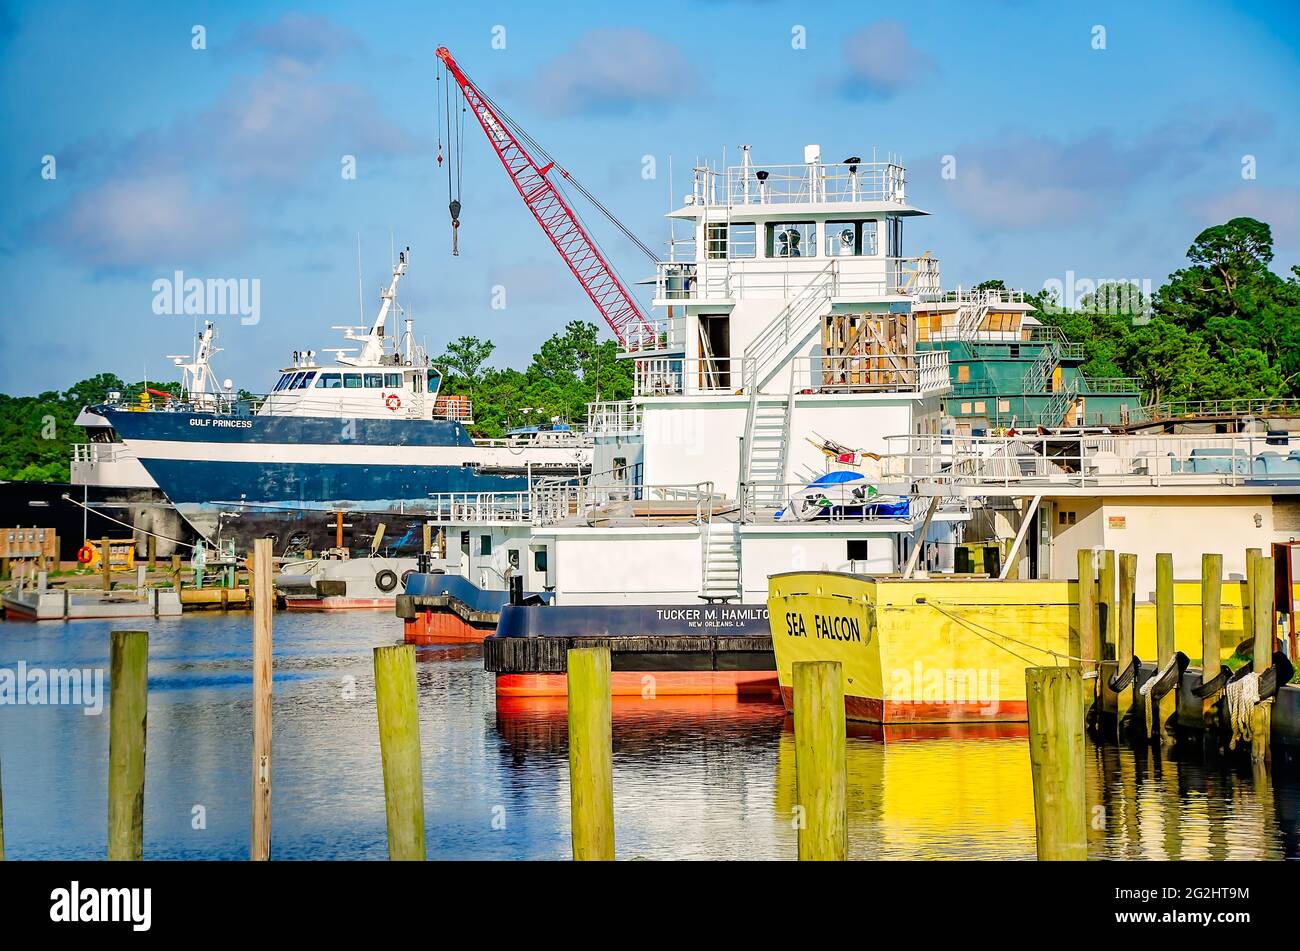 Gulf Princess, an offshore supply vessel, awaits repairs with other boats at a local shipyard, June 9, 2021, in Bayou La Batre, Alabama. Stock Photo